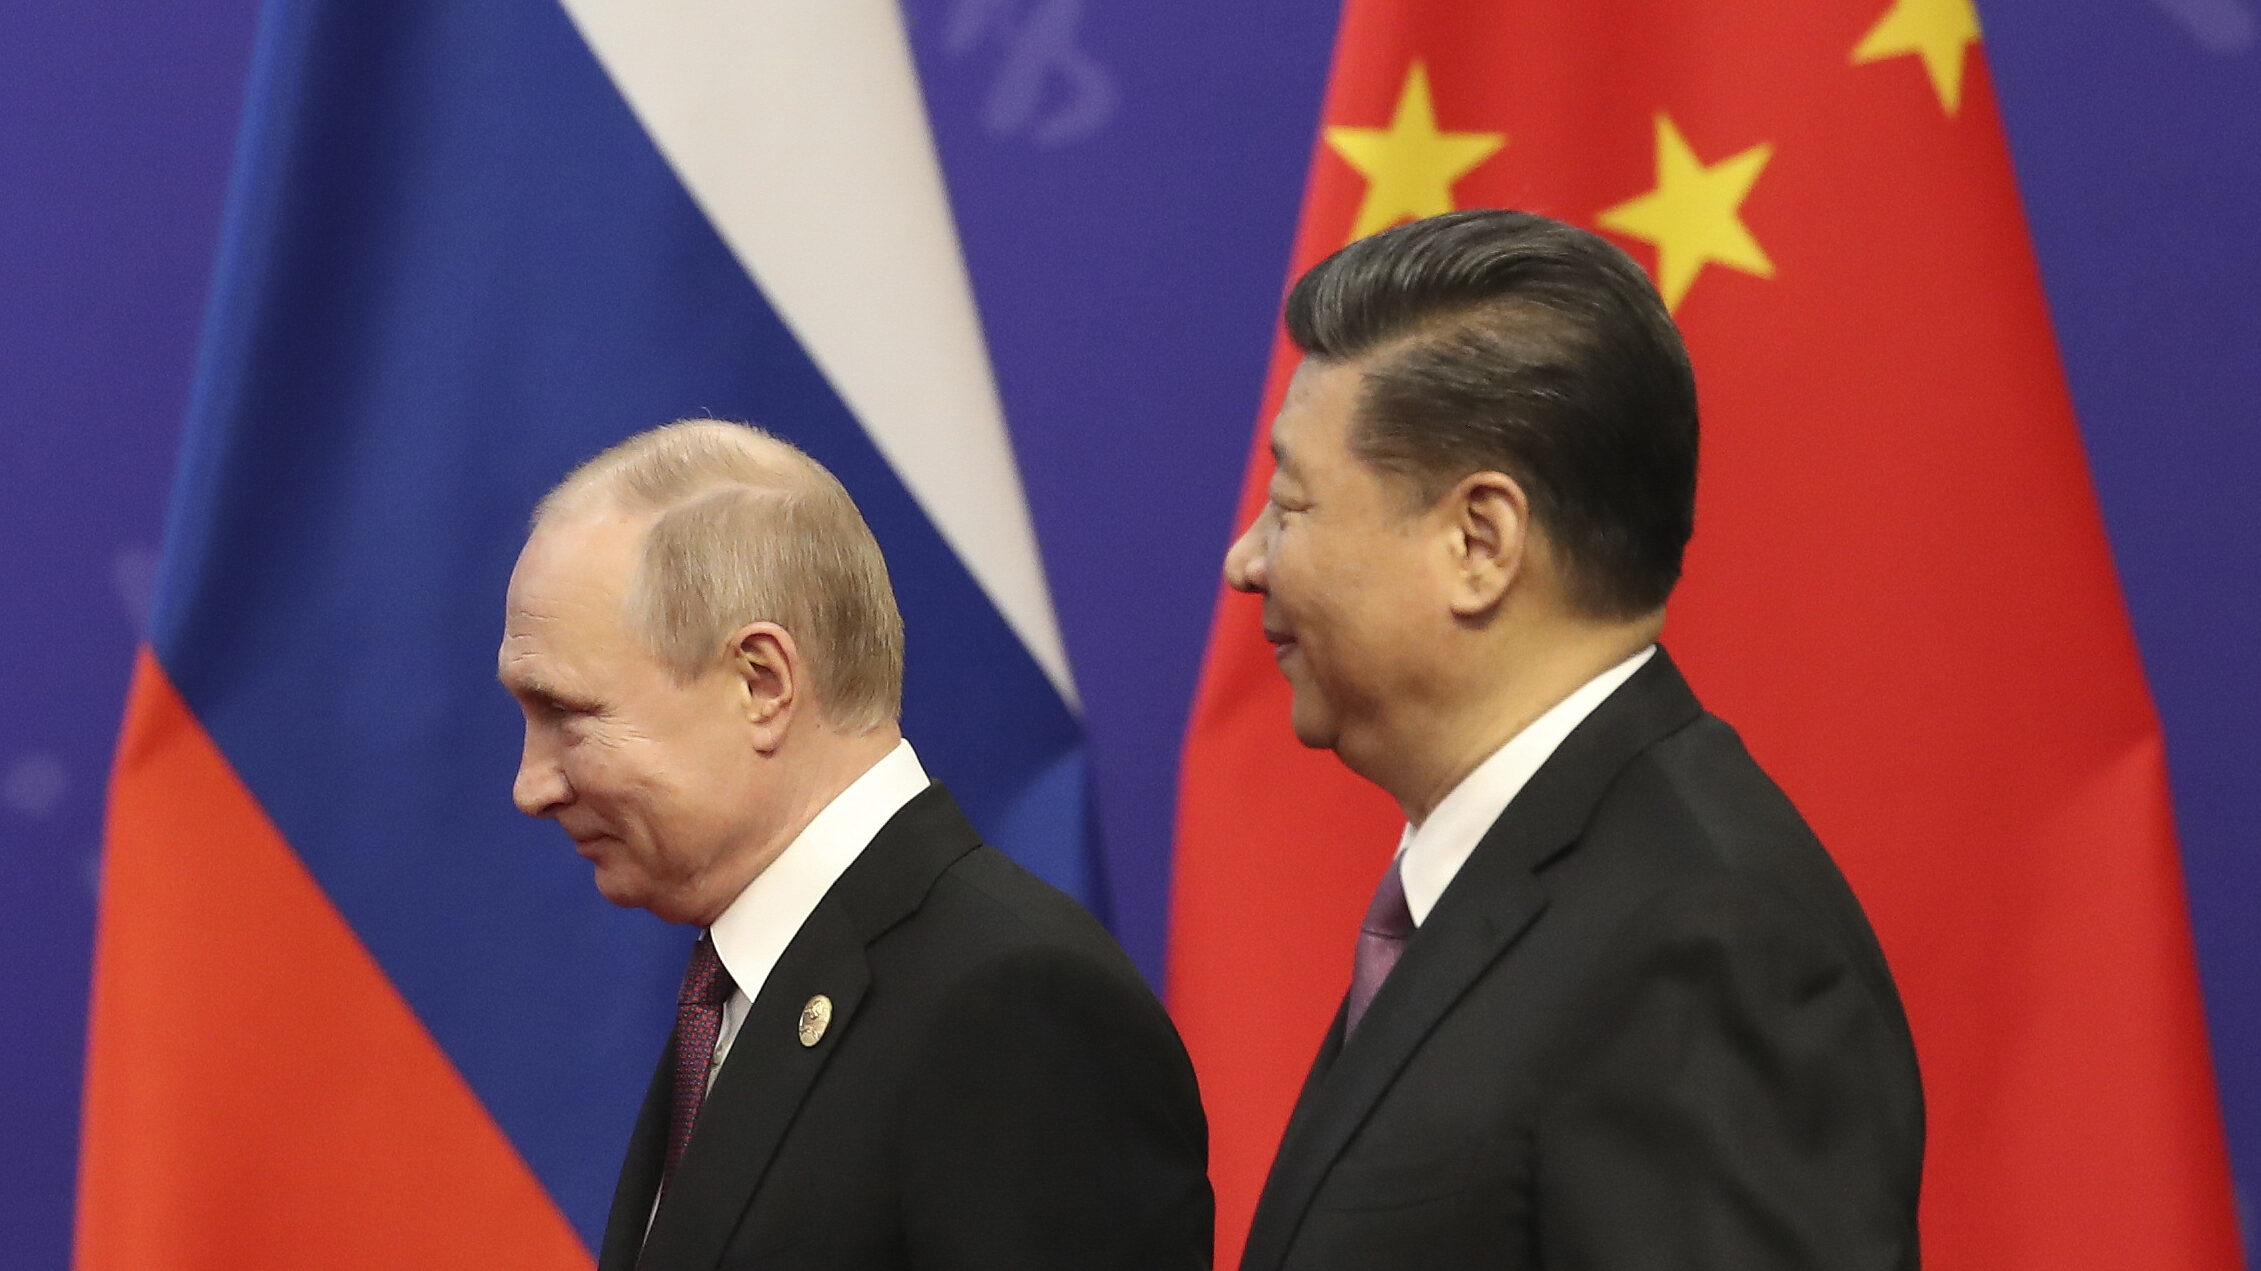 CIA No. 2: China sees Russia as 'junior partner,' likely alarmed by Wagner uprising - Breaking Defense